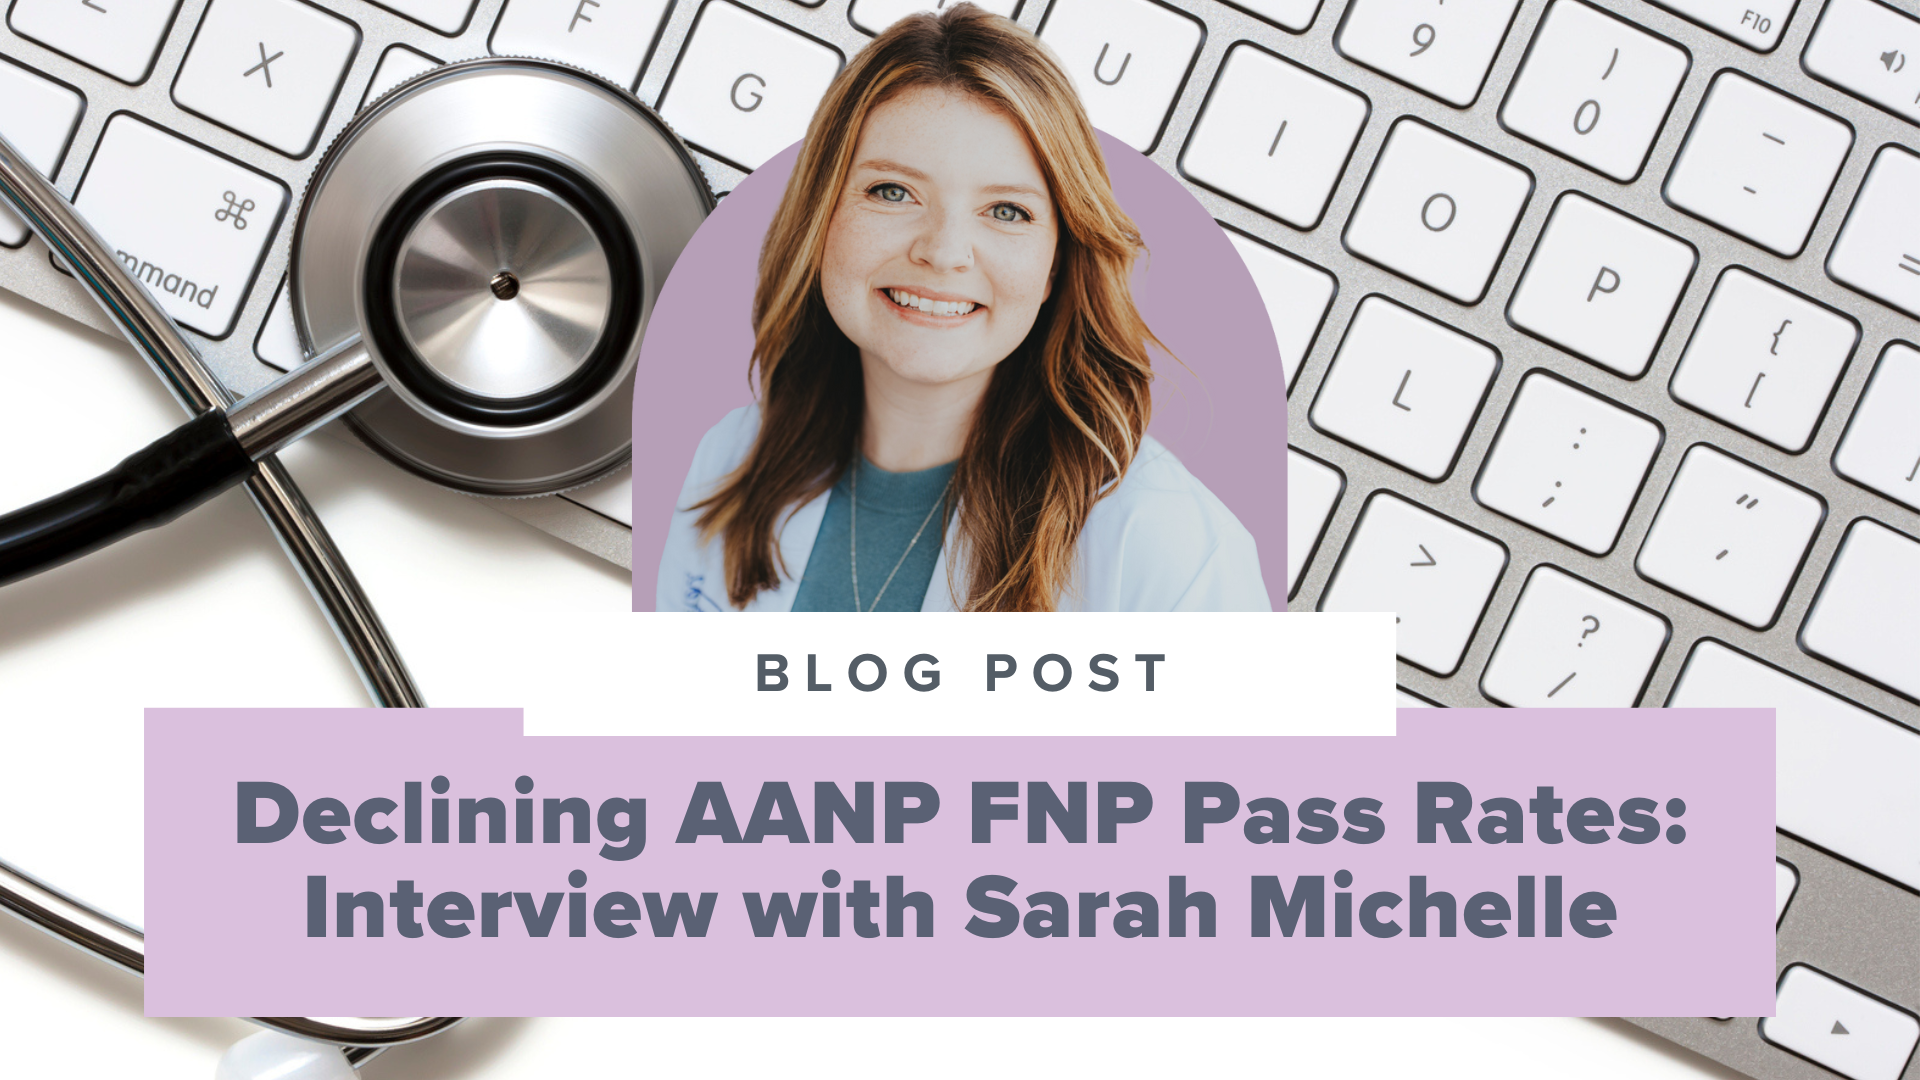 SMNP Blog - The AANP FNP Pass Rate is Down to 75%. Here’s What to Know to Decrease Your Anxiety and Pass the Exam